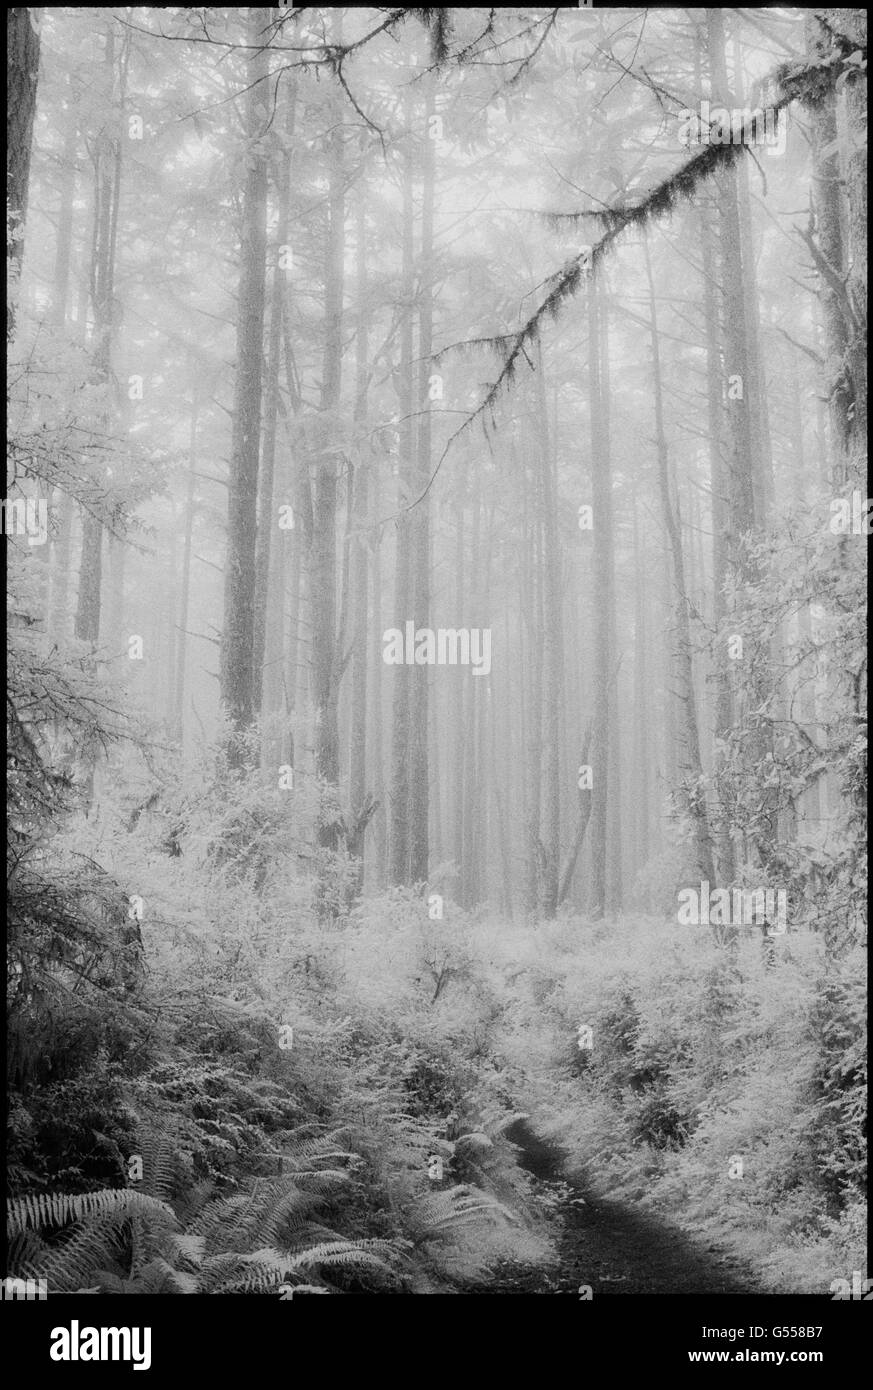 Trail through ferns and douglas fir forest (Pseudotsuga menziesii) in fog, 'Old Pine Trail', Point Reyes National Seashore, Mari Stock Photo